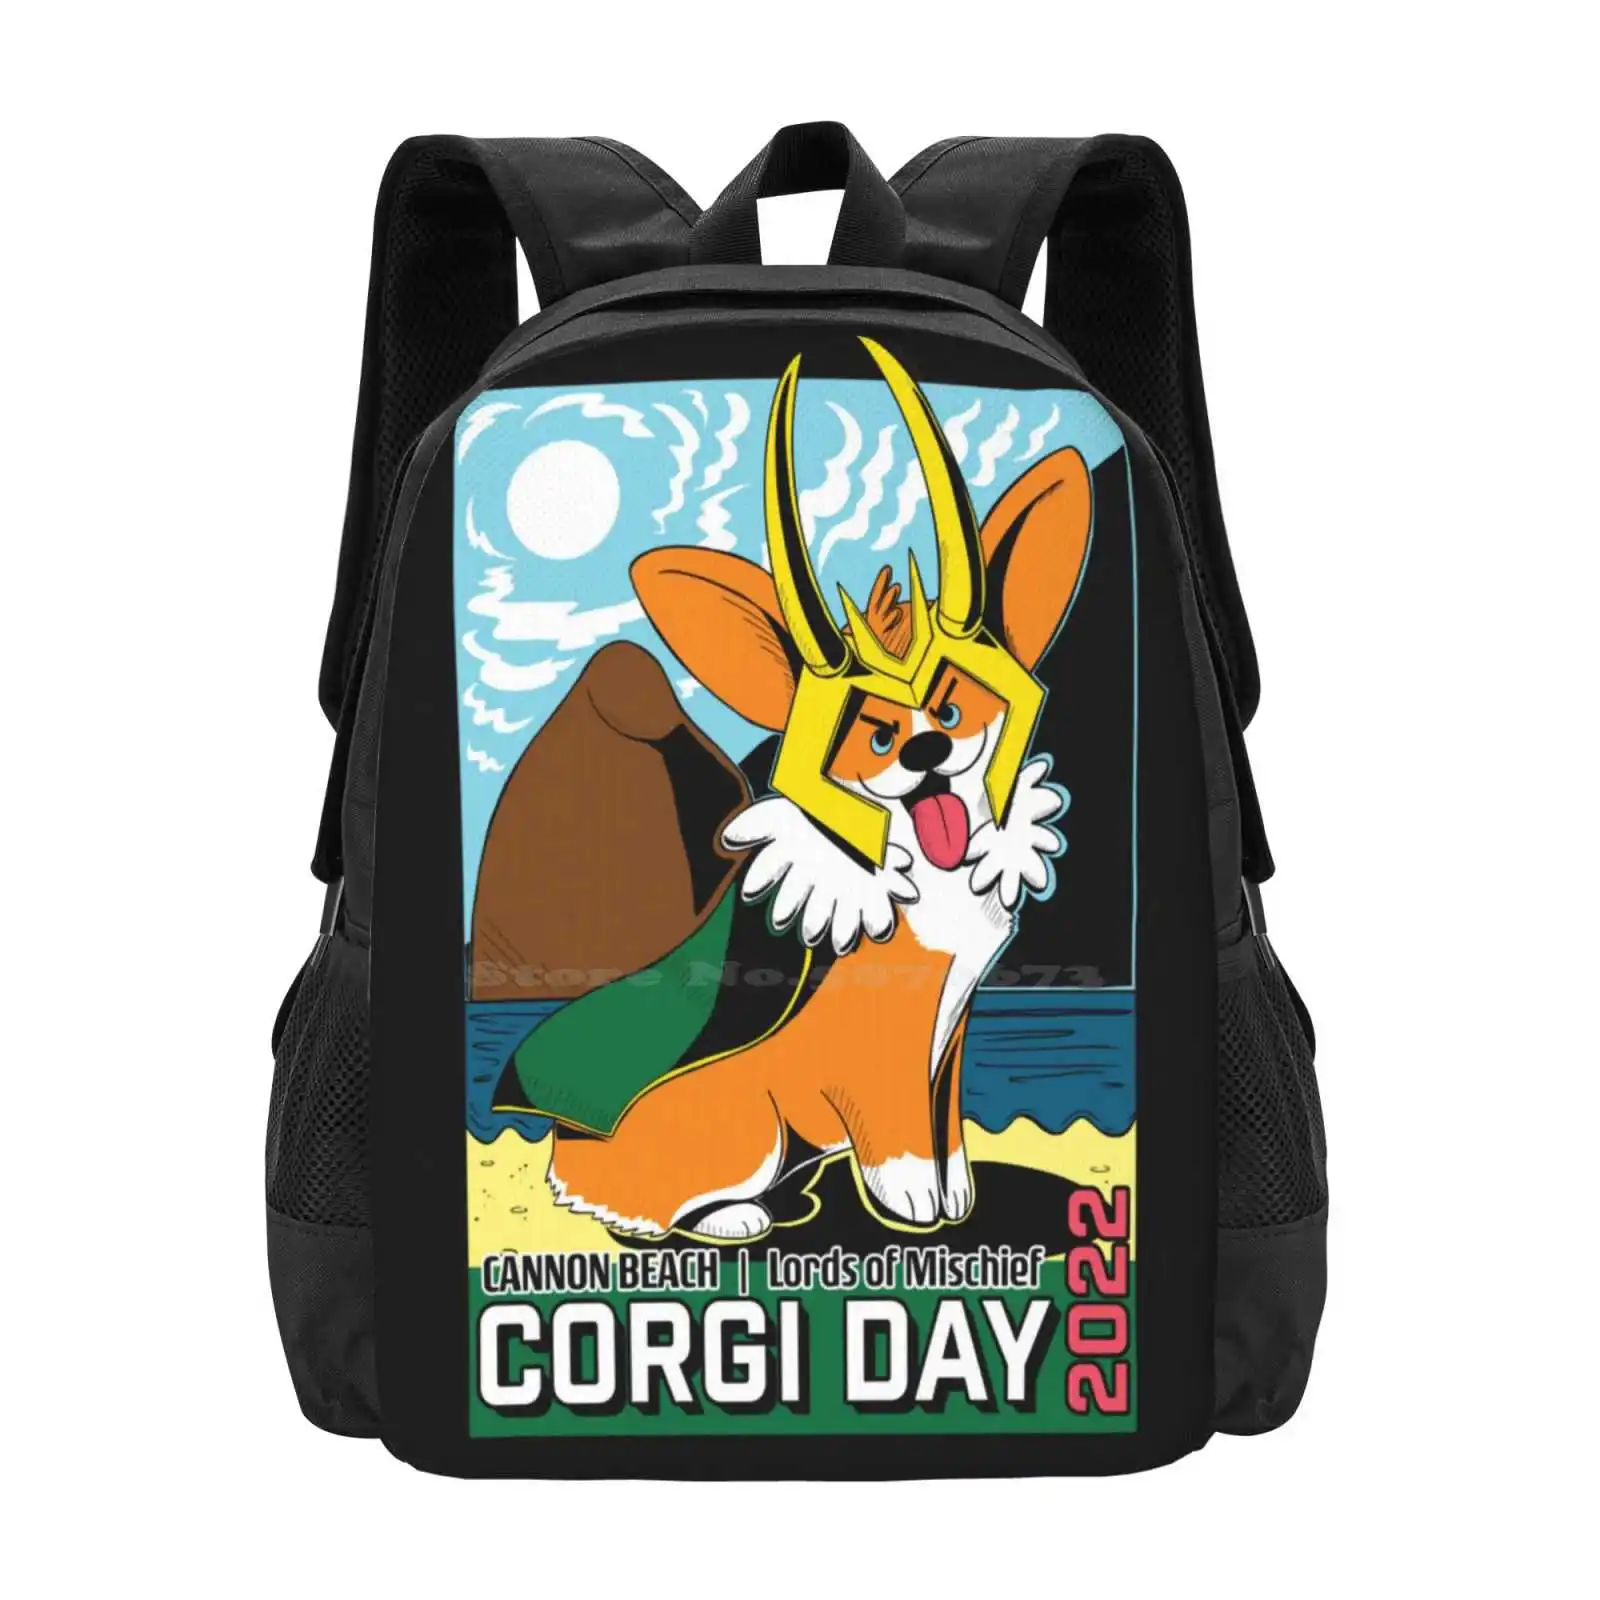 

2022 Lords Of Mischief Backpacks For School Teenagers Girls Travel Bags Beach Day Cannon Beach Corgi Mischief Dogs